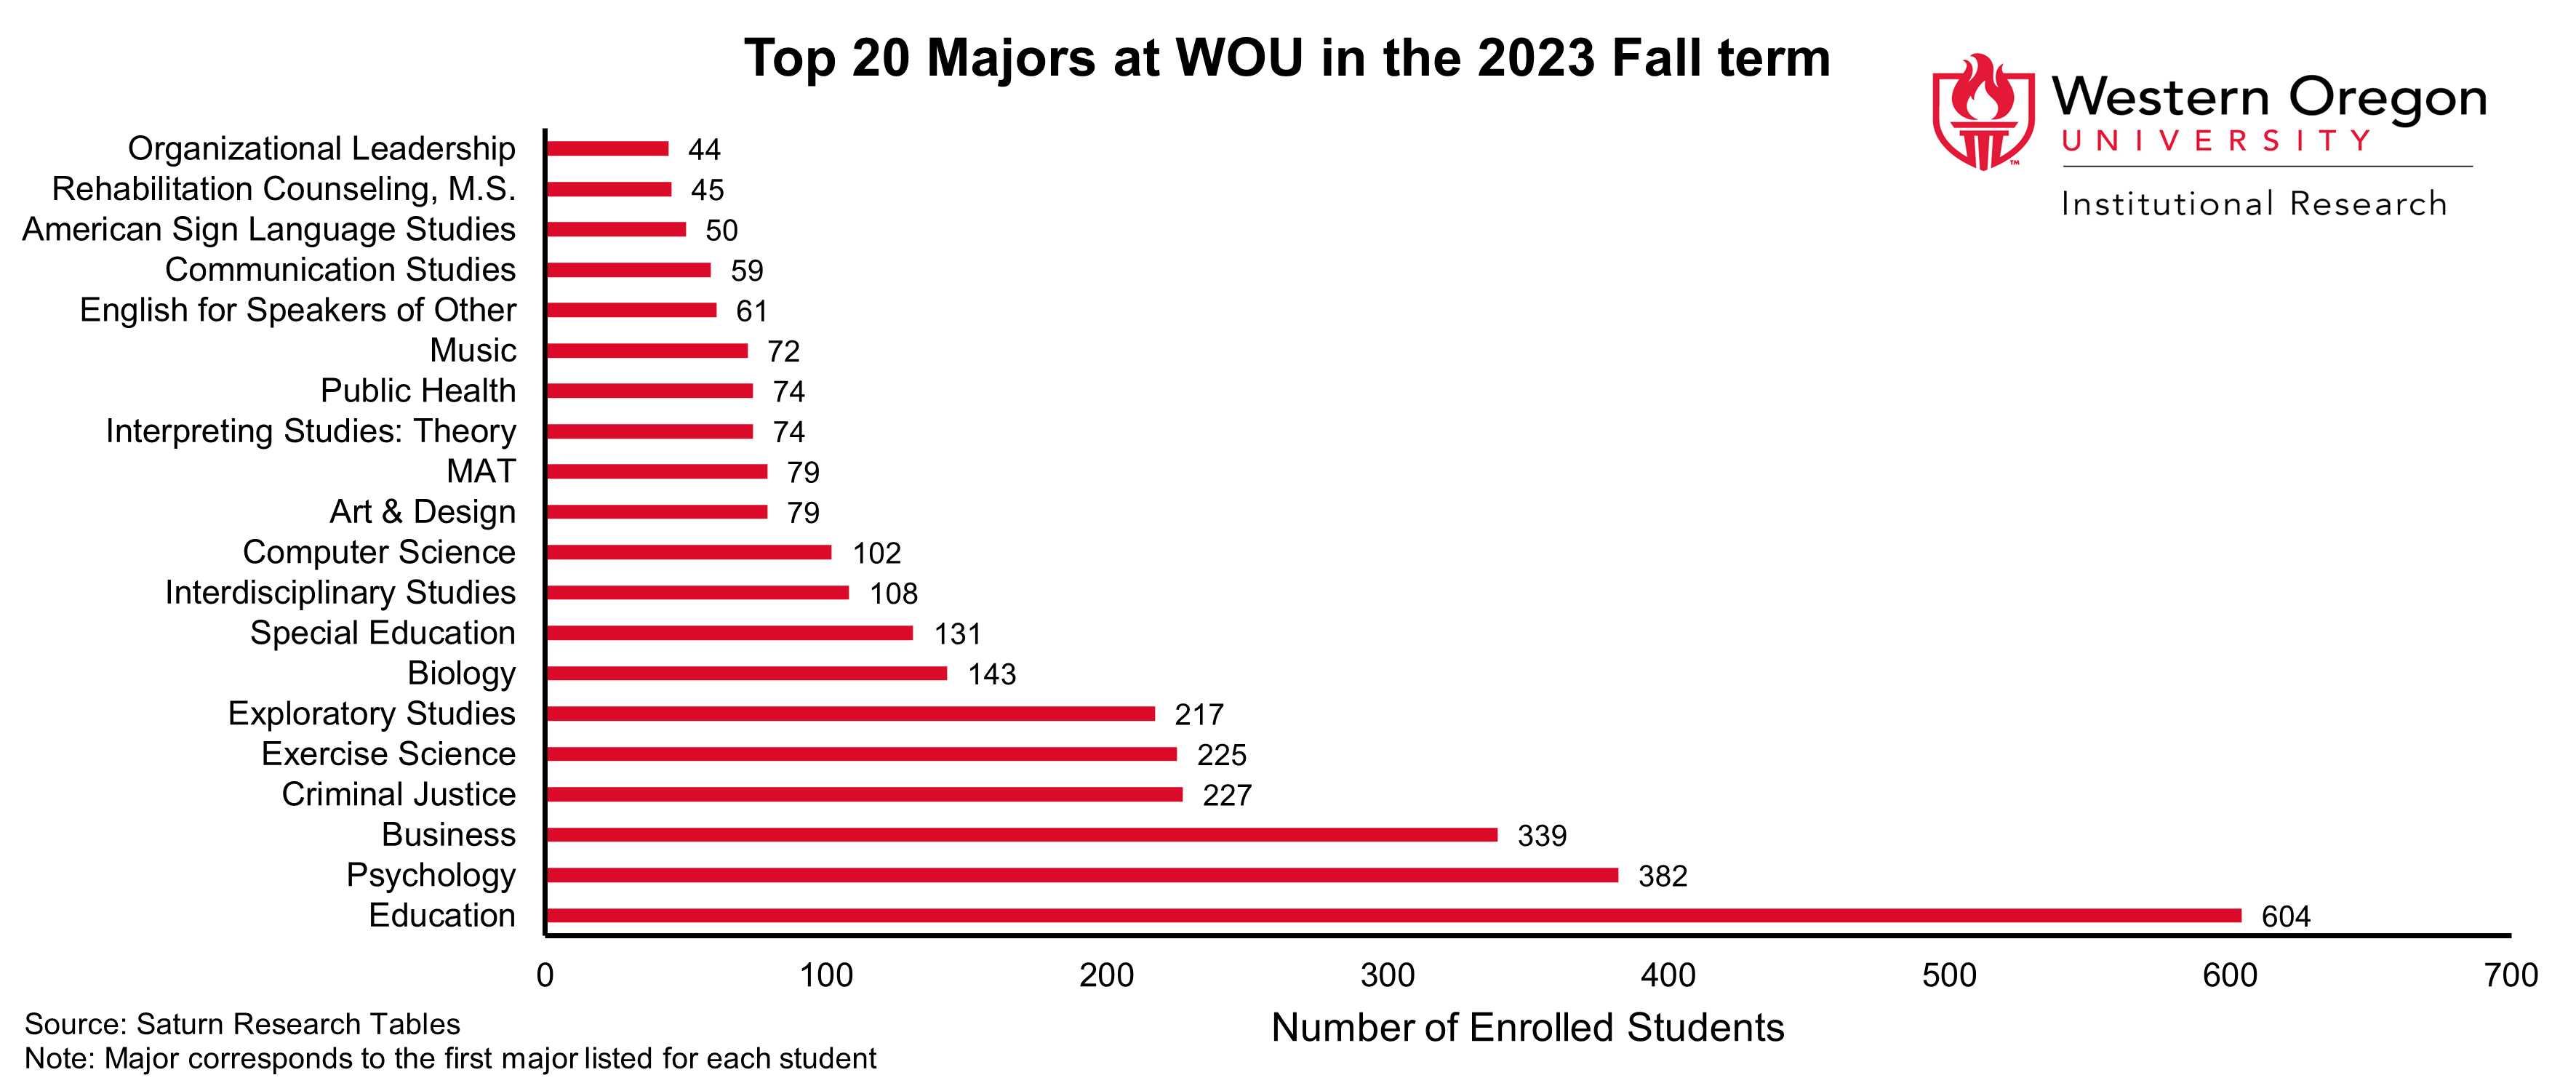 Bar graph of the top 20 majors at WOU in Fall 2023, showing that Education, Psychology and Business are the majors with the largest number of students enrolled.